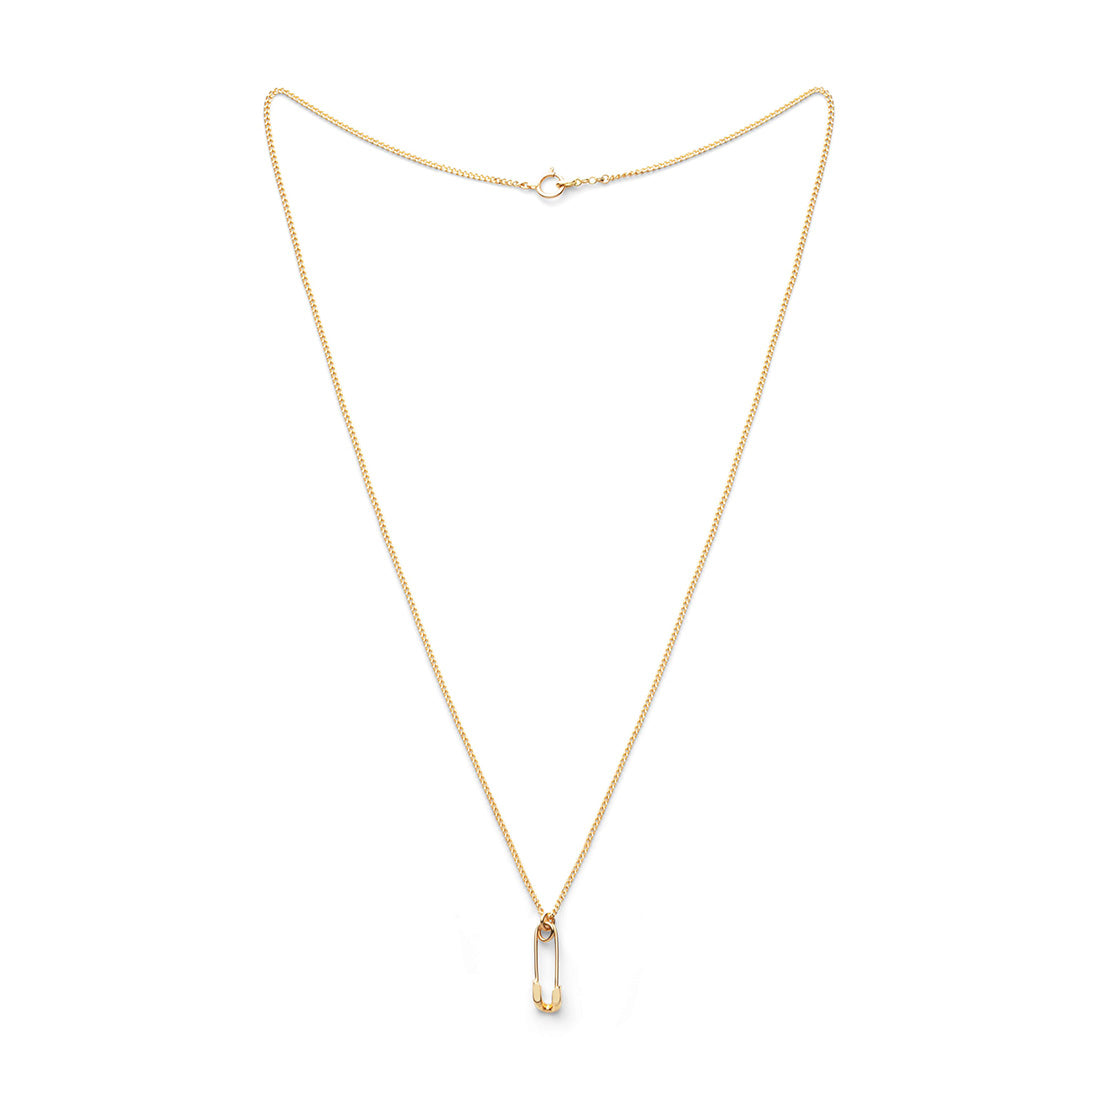 18K　Safety Pin　Necklace　ネックレス　イエローゴールド